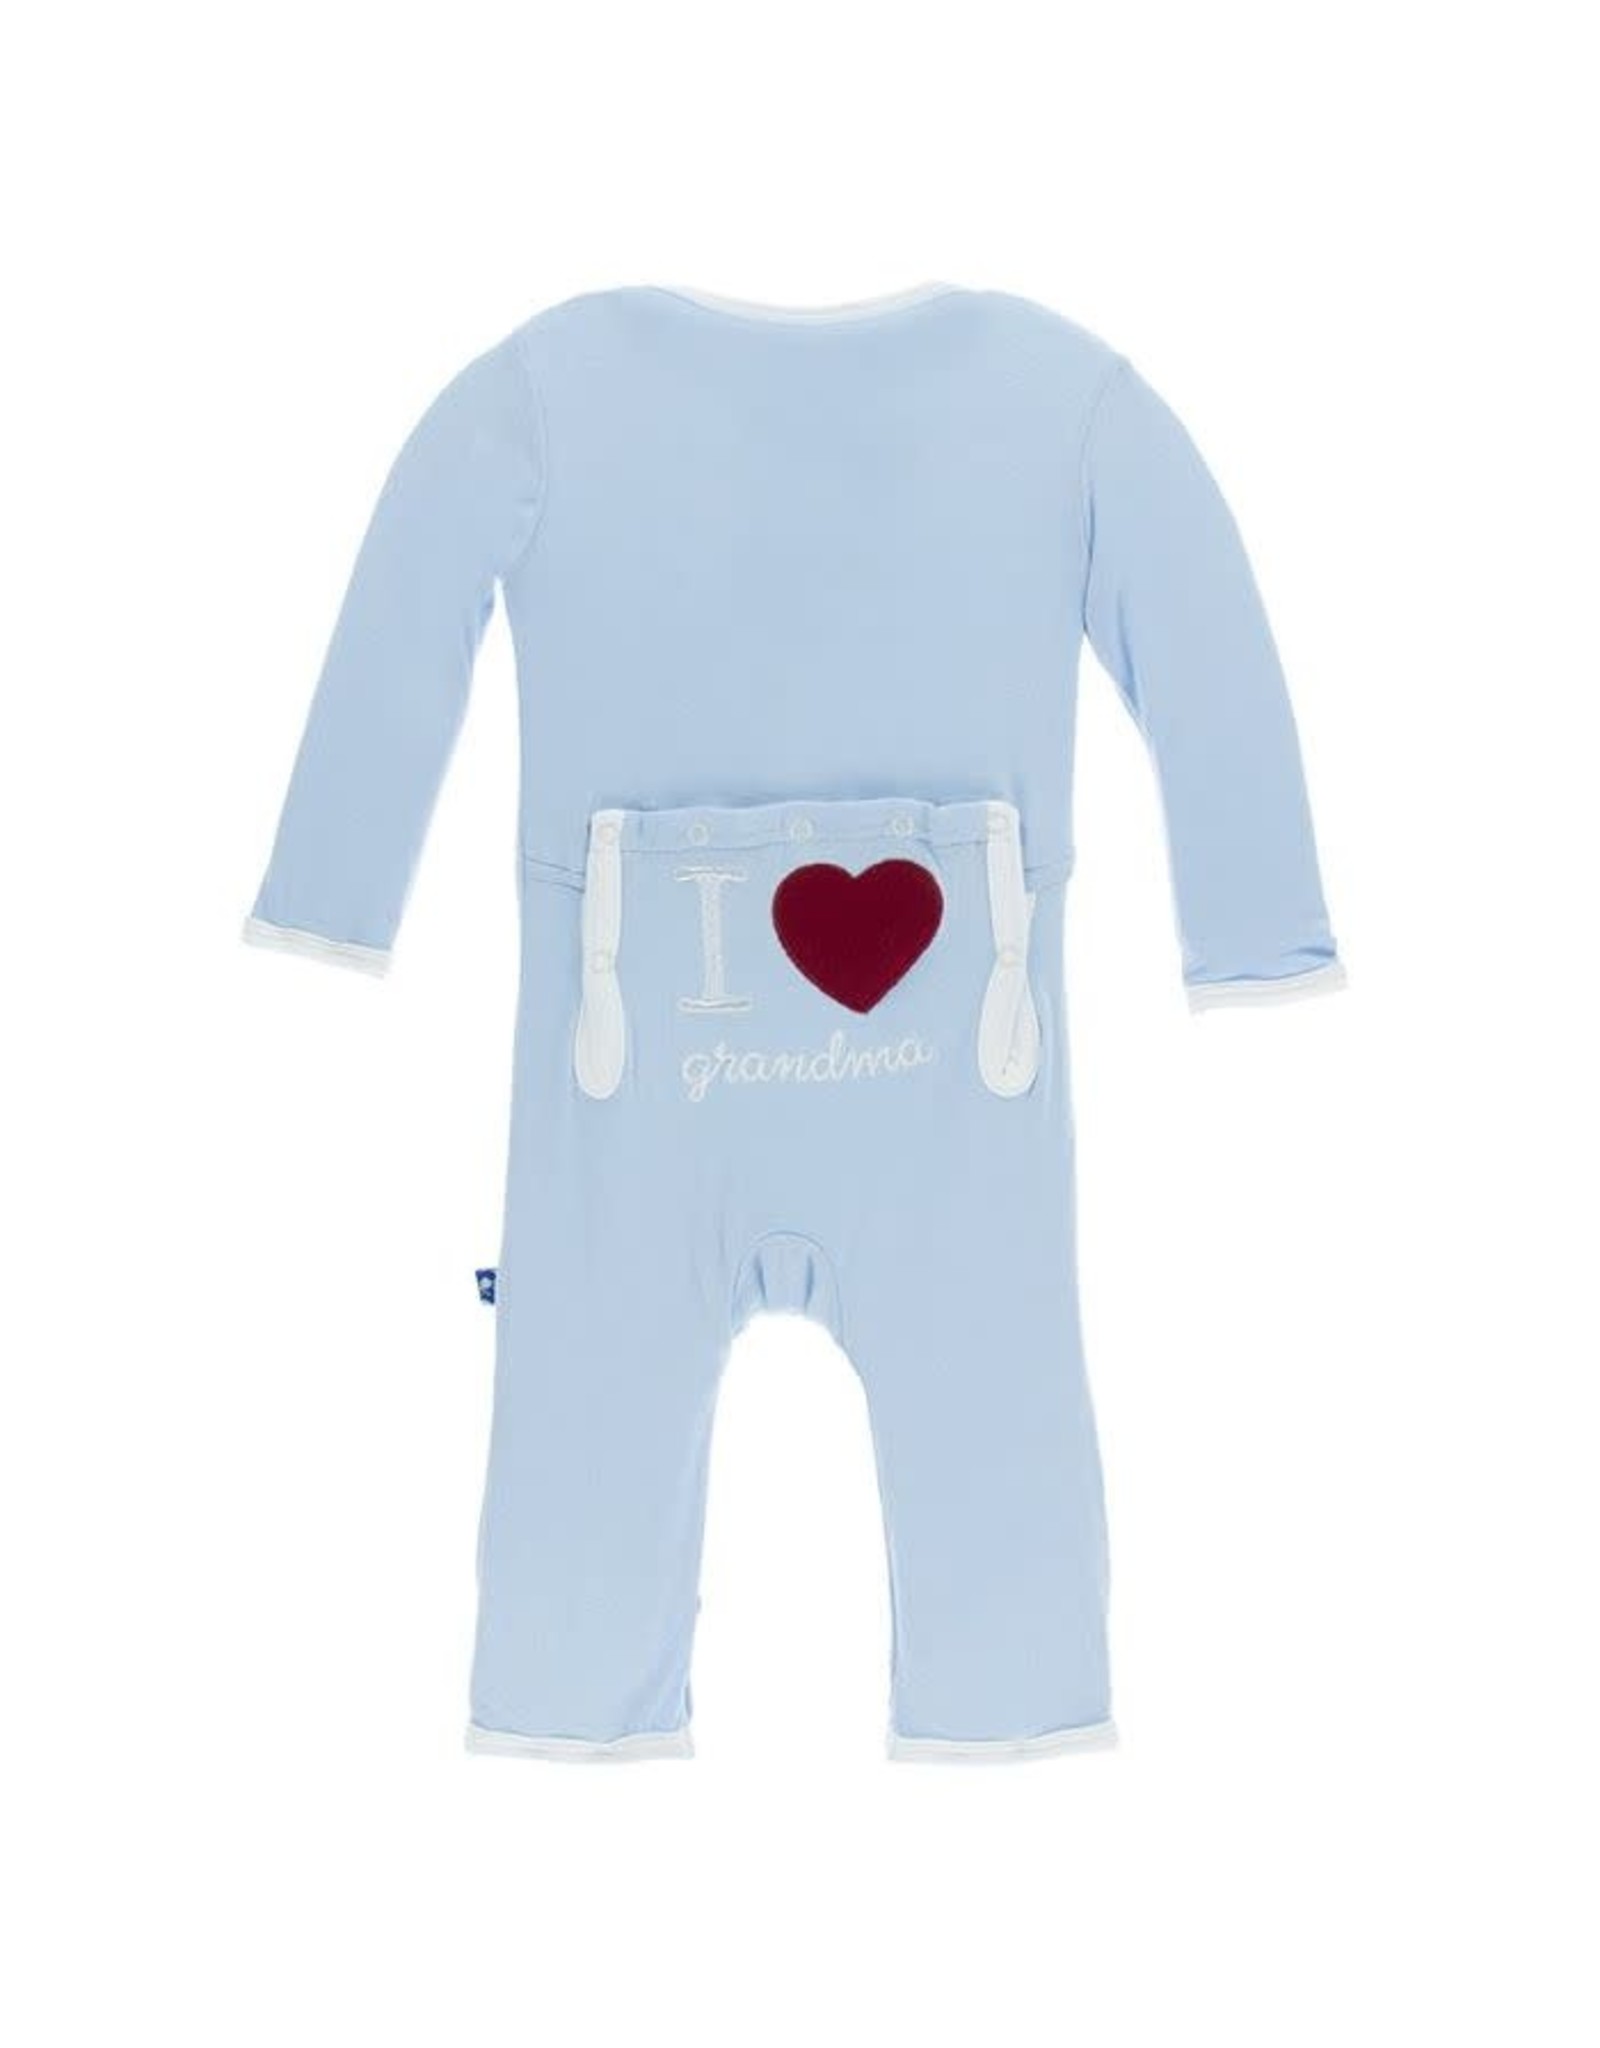 Kickee Pants Applique Coverall with Zipper in Pond I Love Grandma